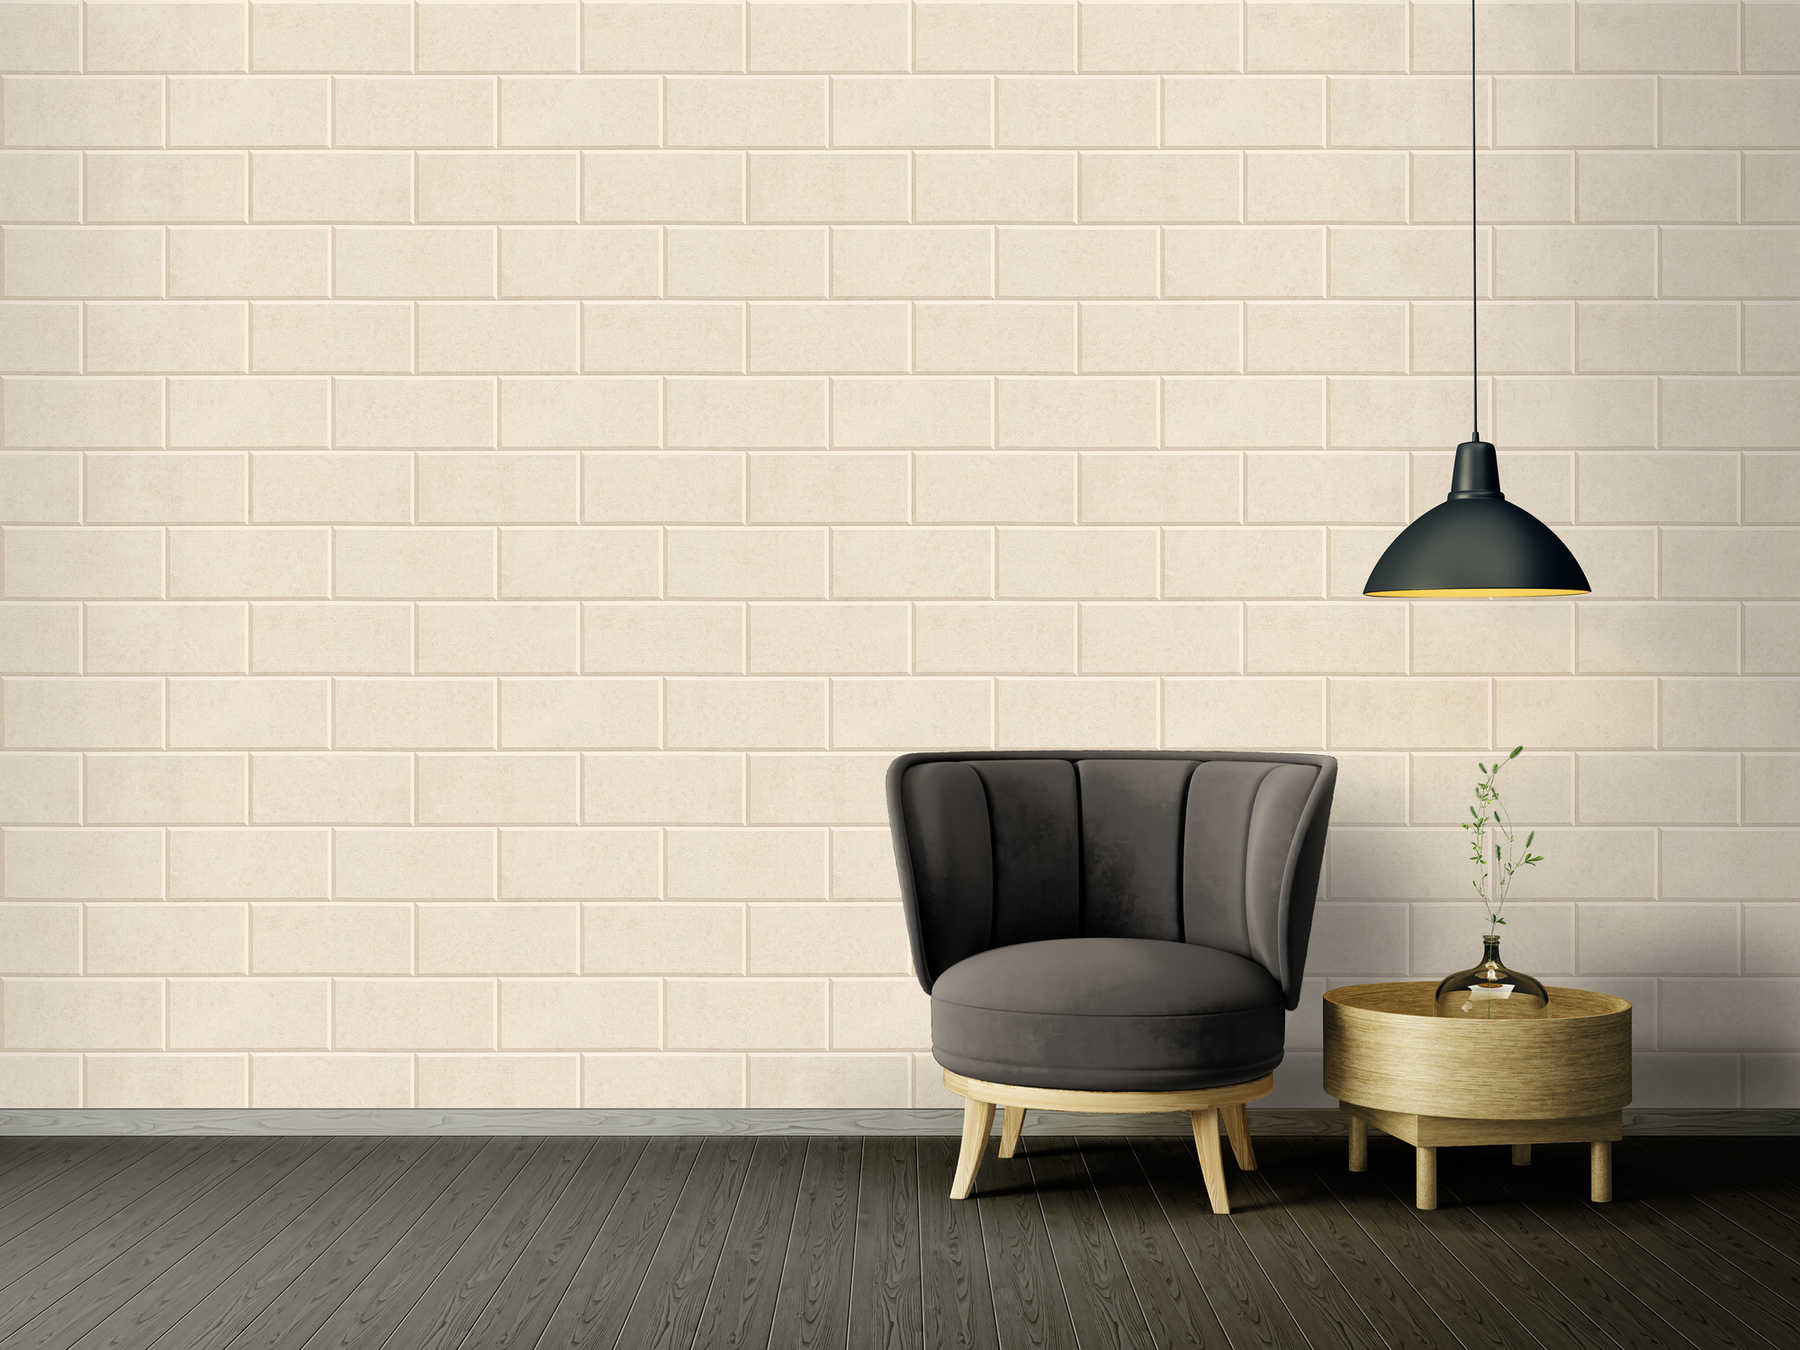             Stone look wallpaper with 3D joints in light stone - beige
        